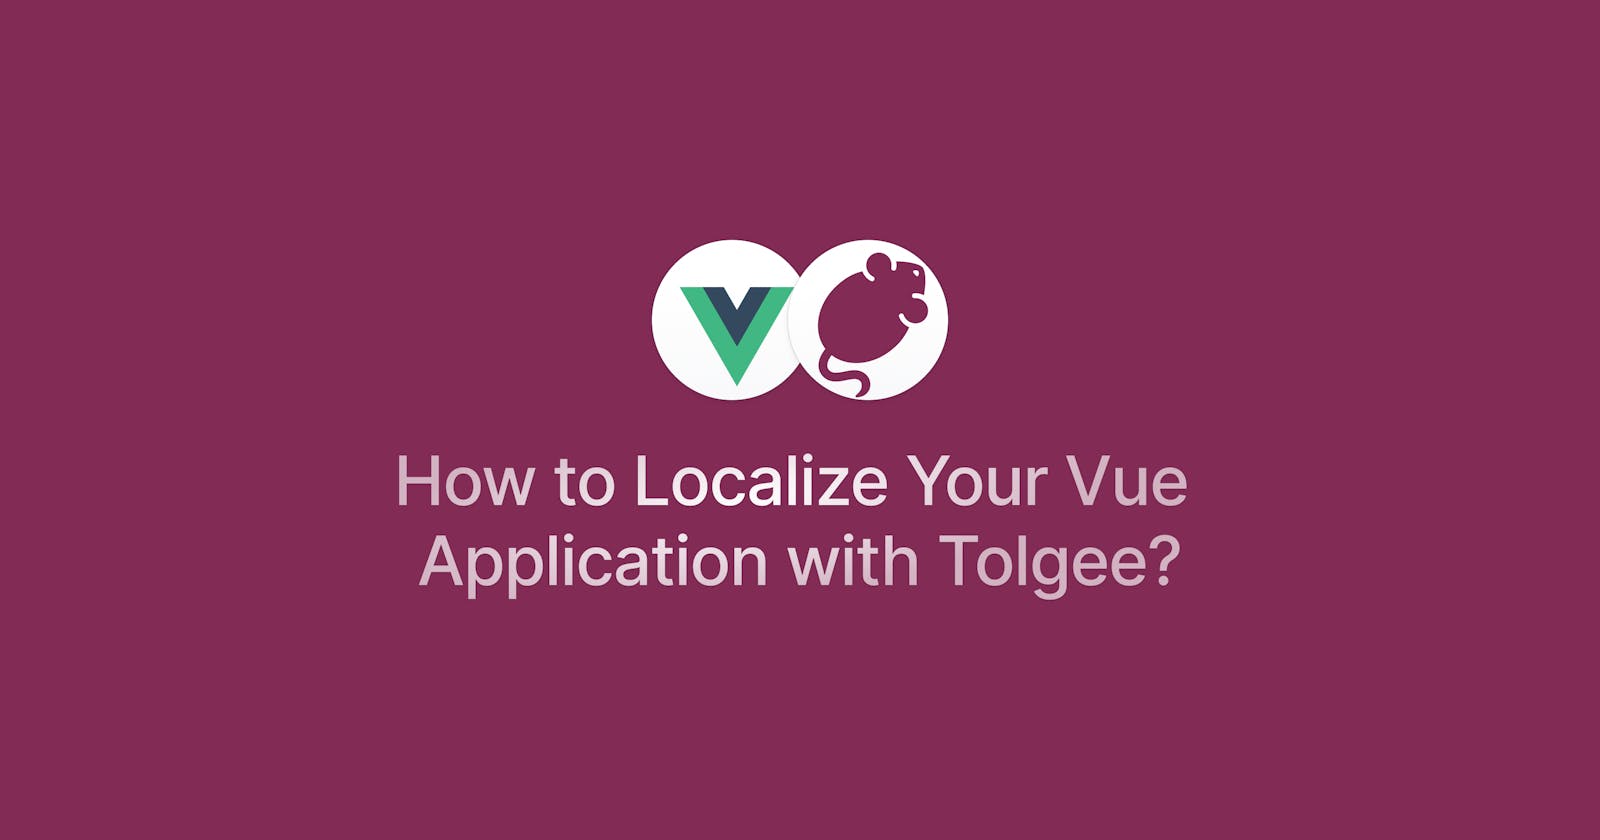 How to Localize Your Vue Application with Tolgee?